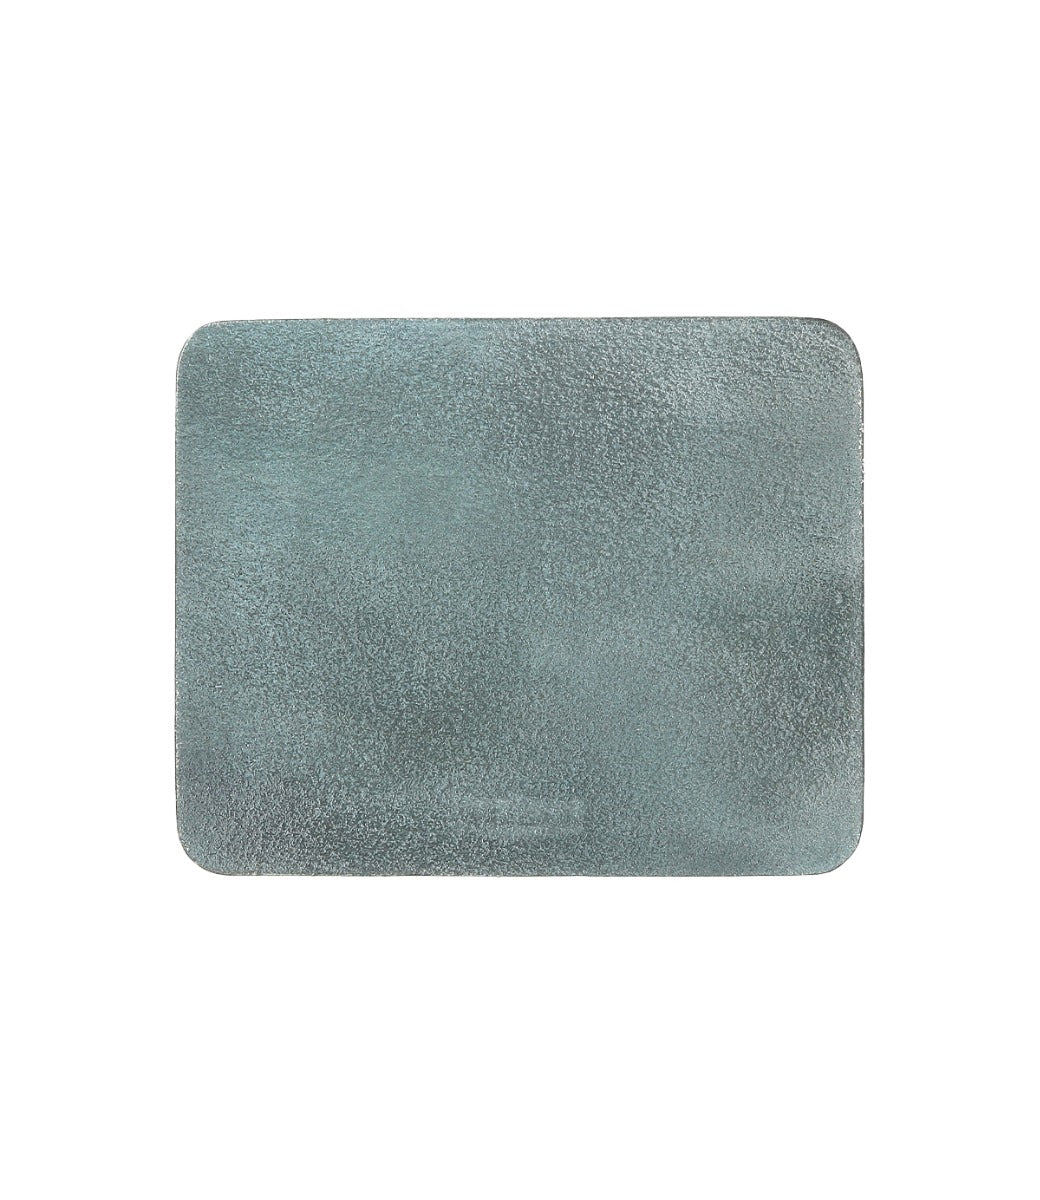 A blue leather Bed Stu Launcher coaster on a white background.